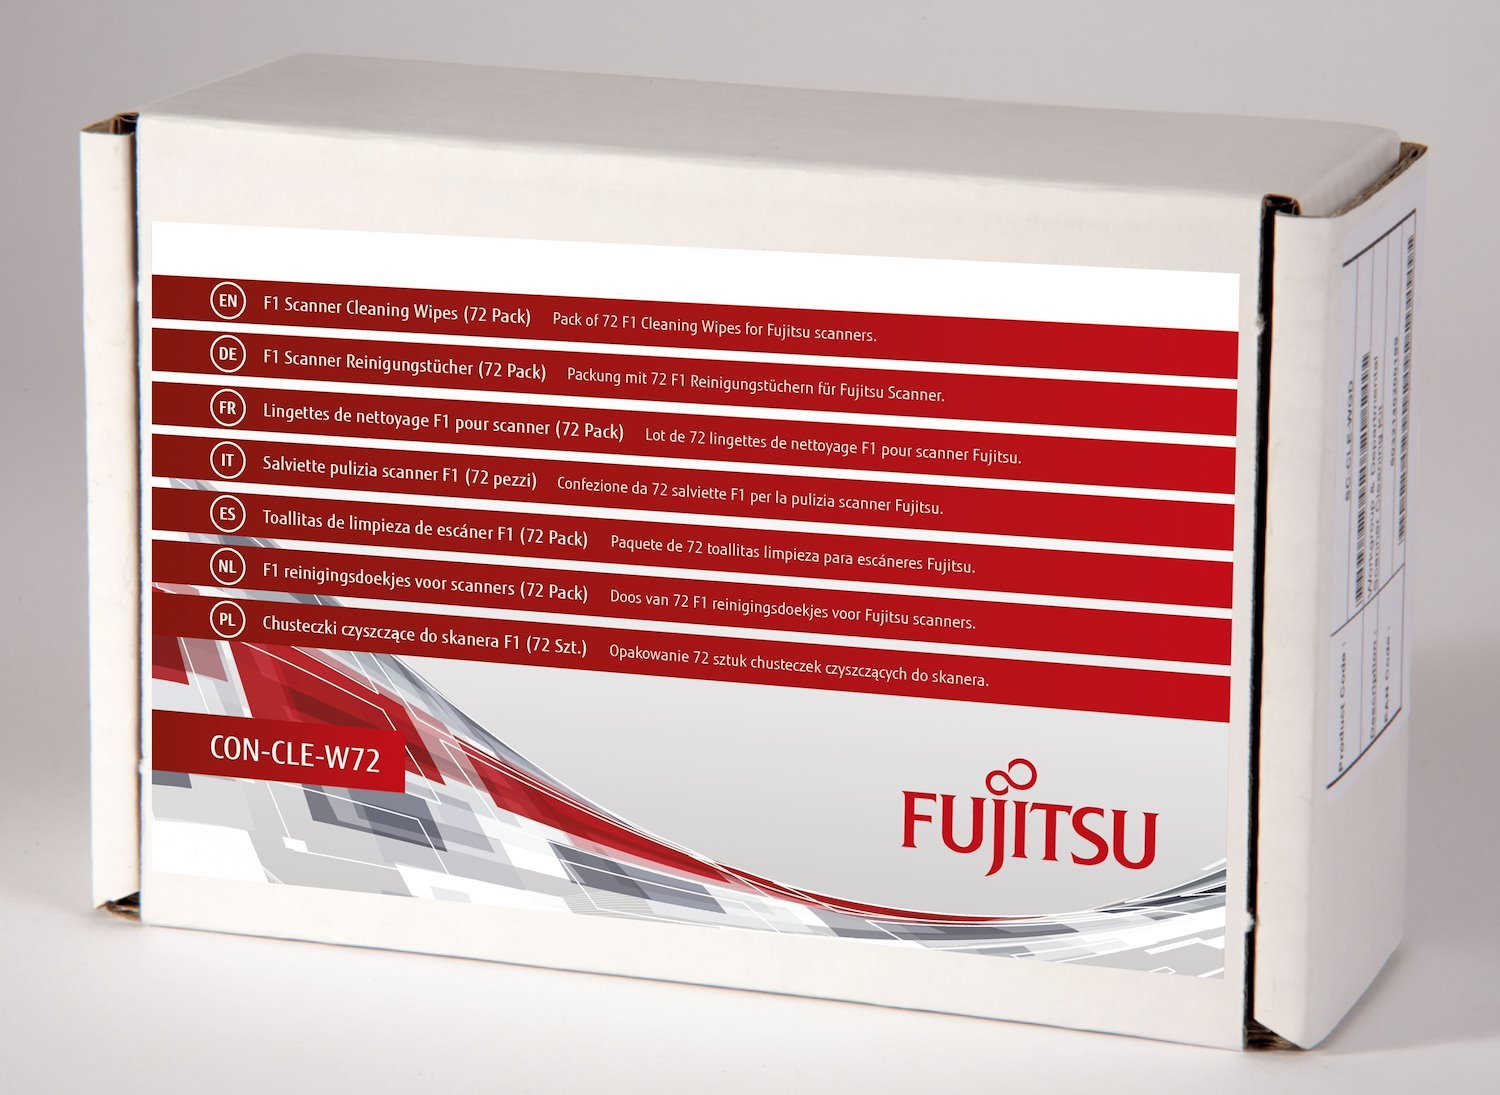 Fujitsu F1 Scanner Cleaning Wipes [72 Pack] (Scanner Cleaning Kit [WGD] 72 Pack)